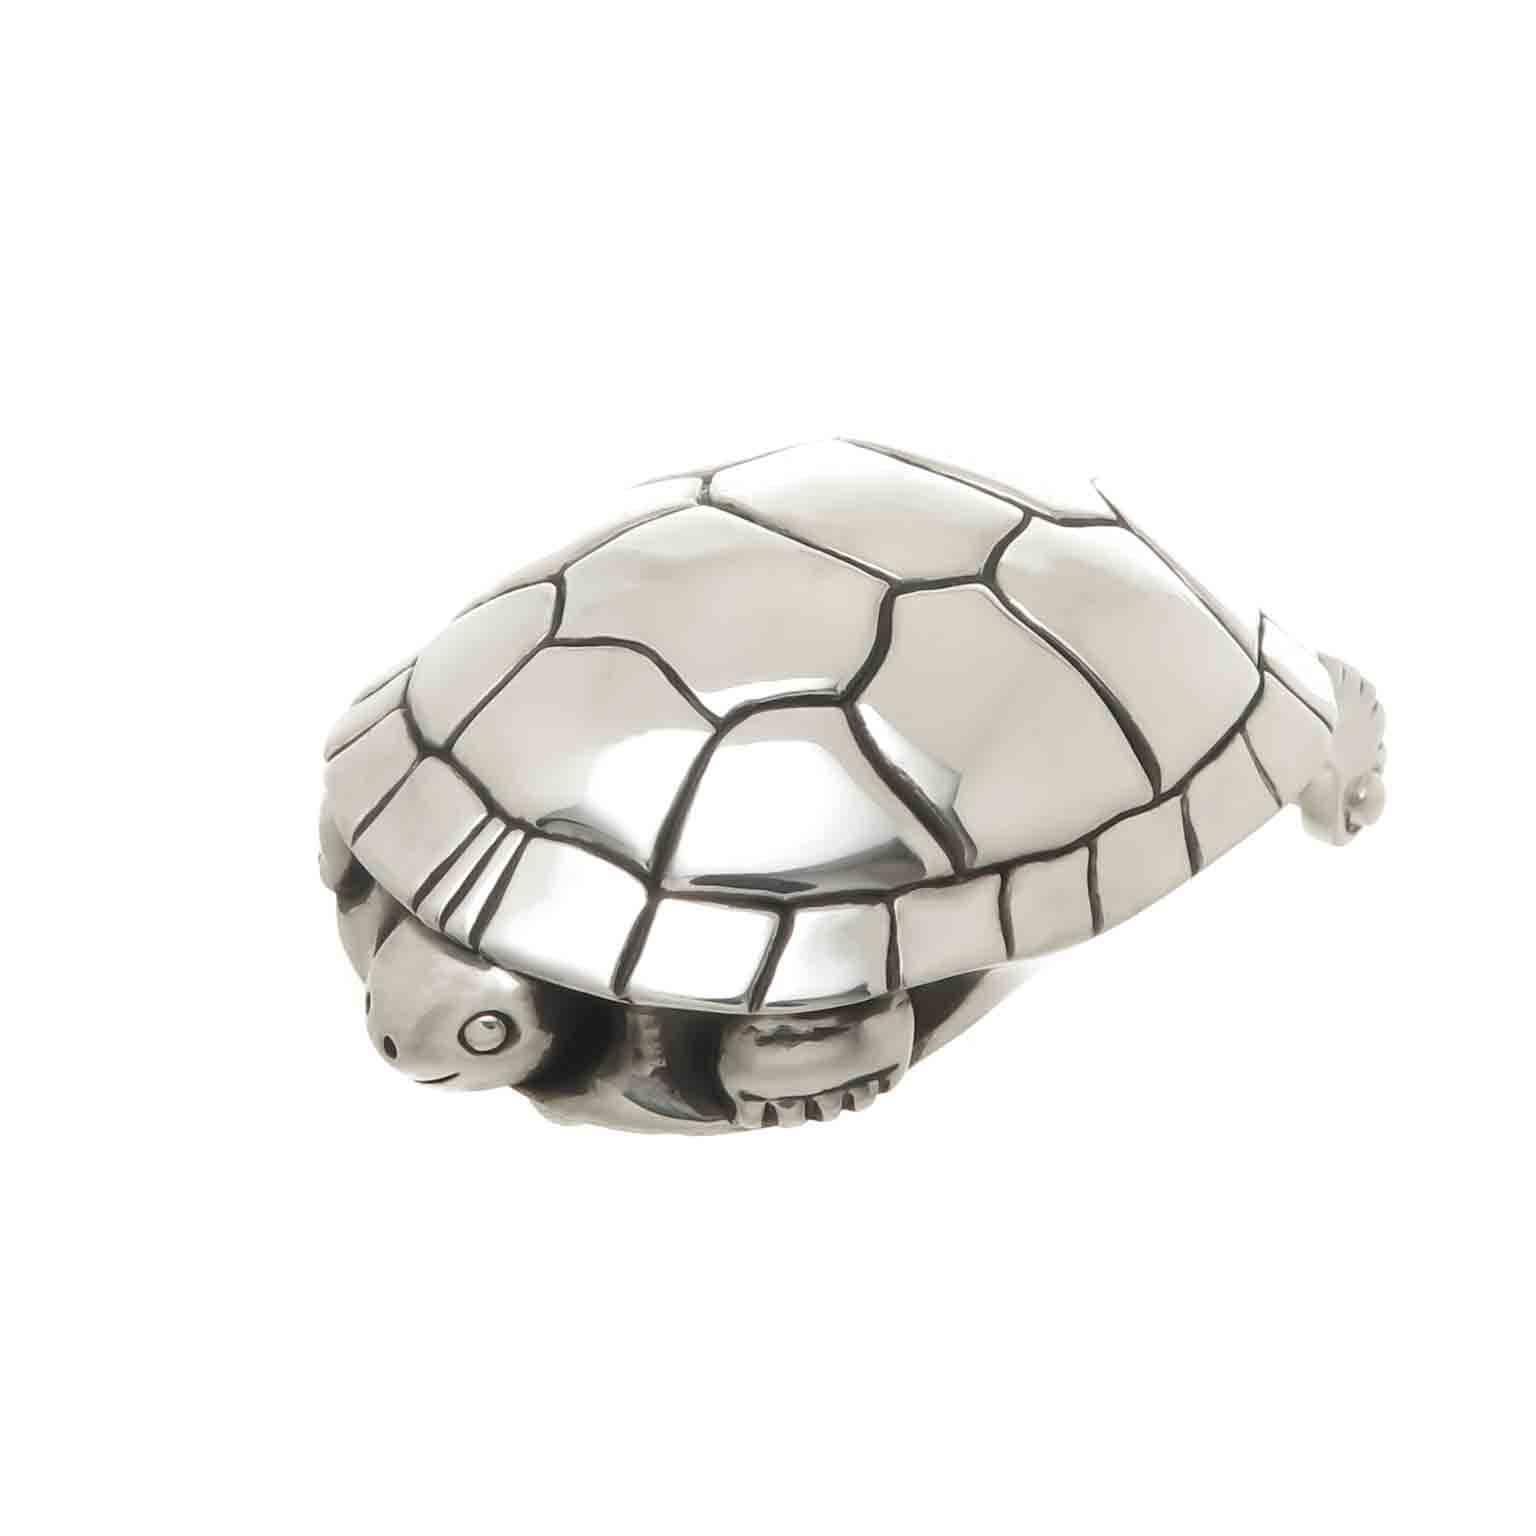 Circa 2000 Barry Kieselstein Cord Sterling Silver Turtle Form Belt Buckle, measuring 2 5/8 inch in length and 2 inch wide, very detailed, signed and numbered. 